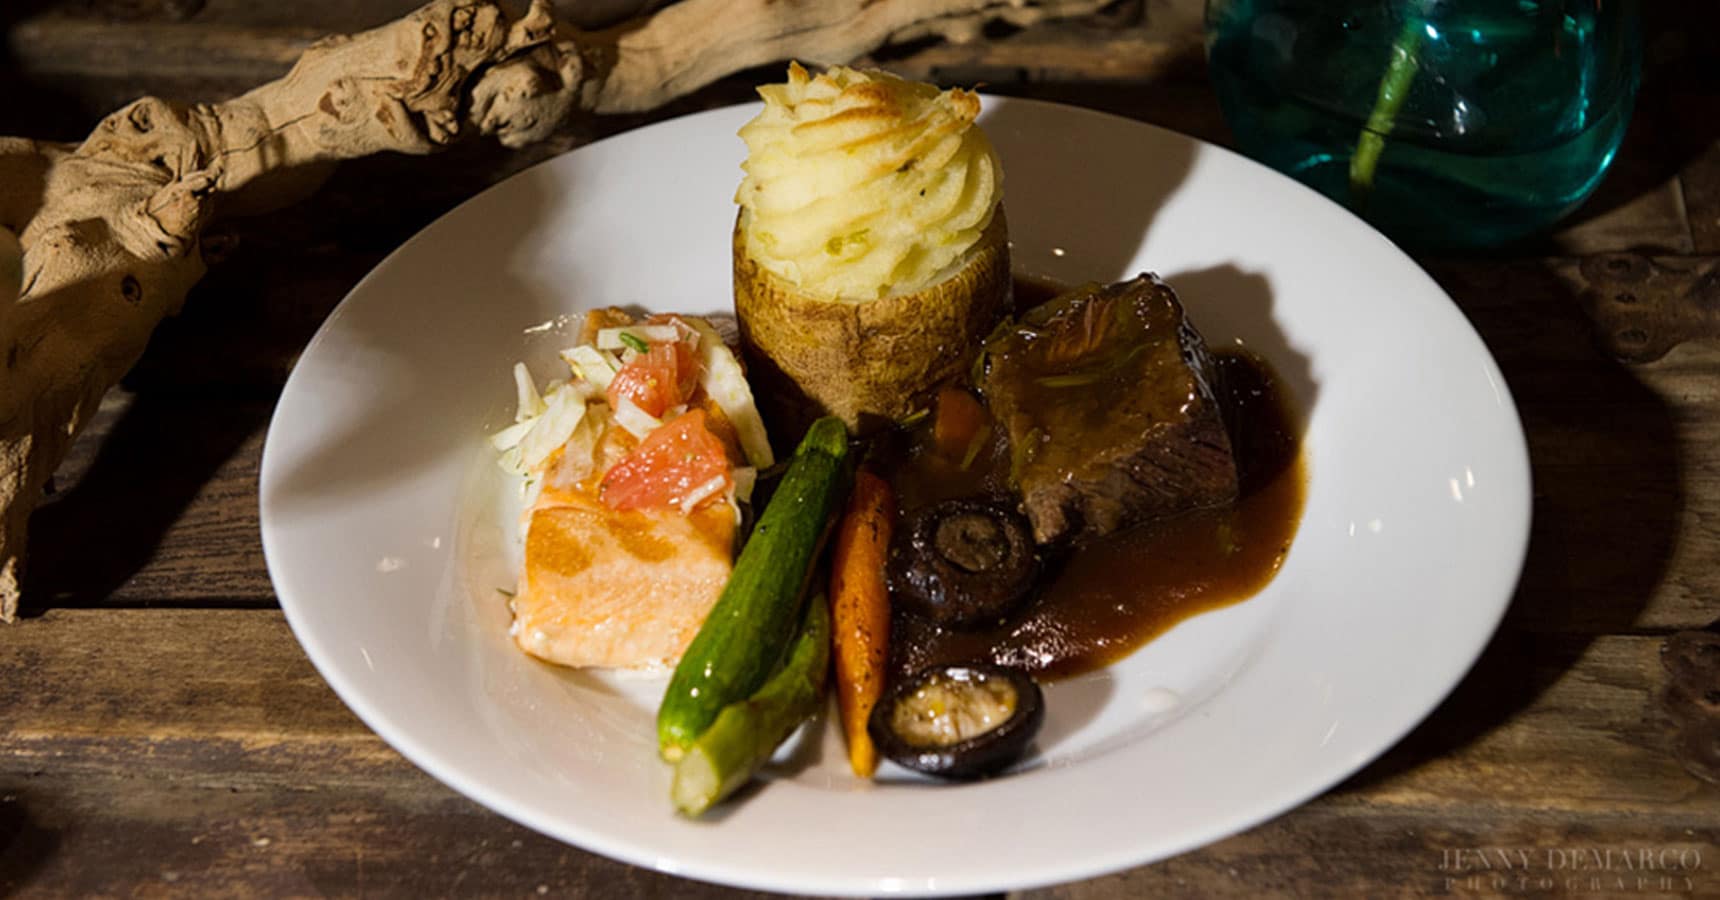 Braised beef short ribs with root vegetables, petite salmon filet plated entrees by crave catering